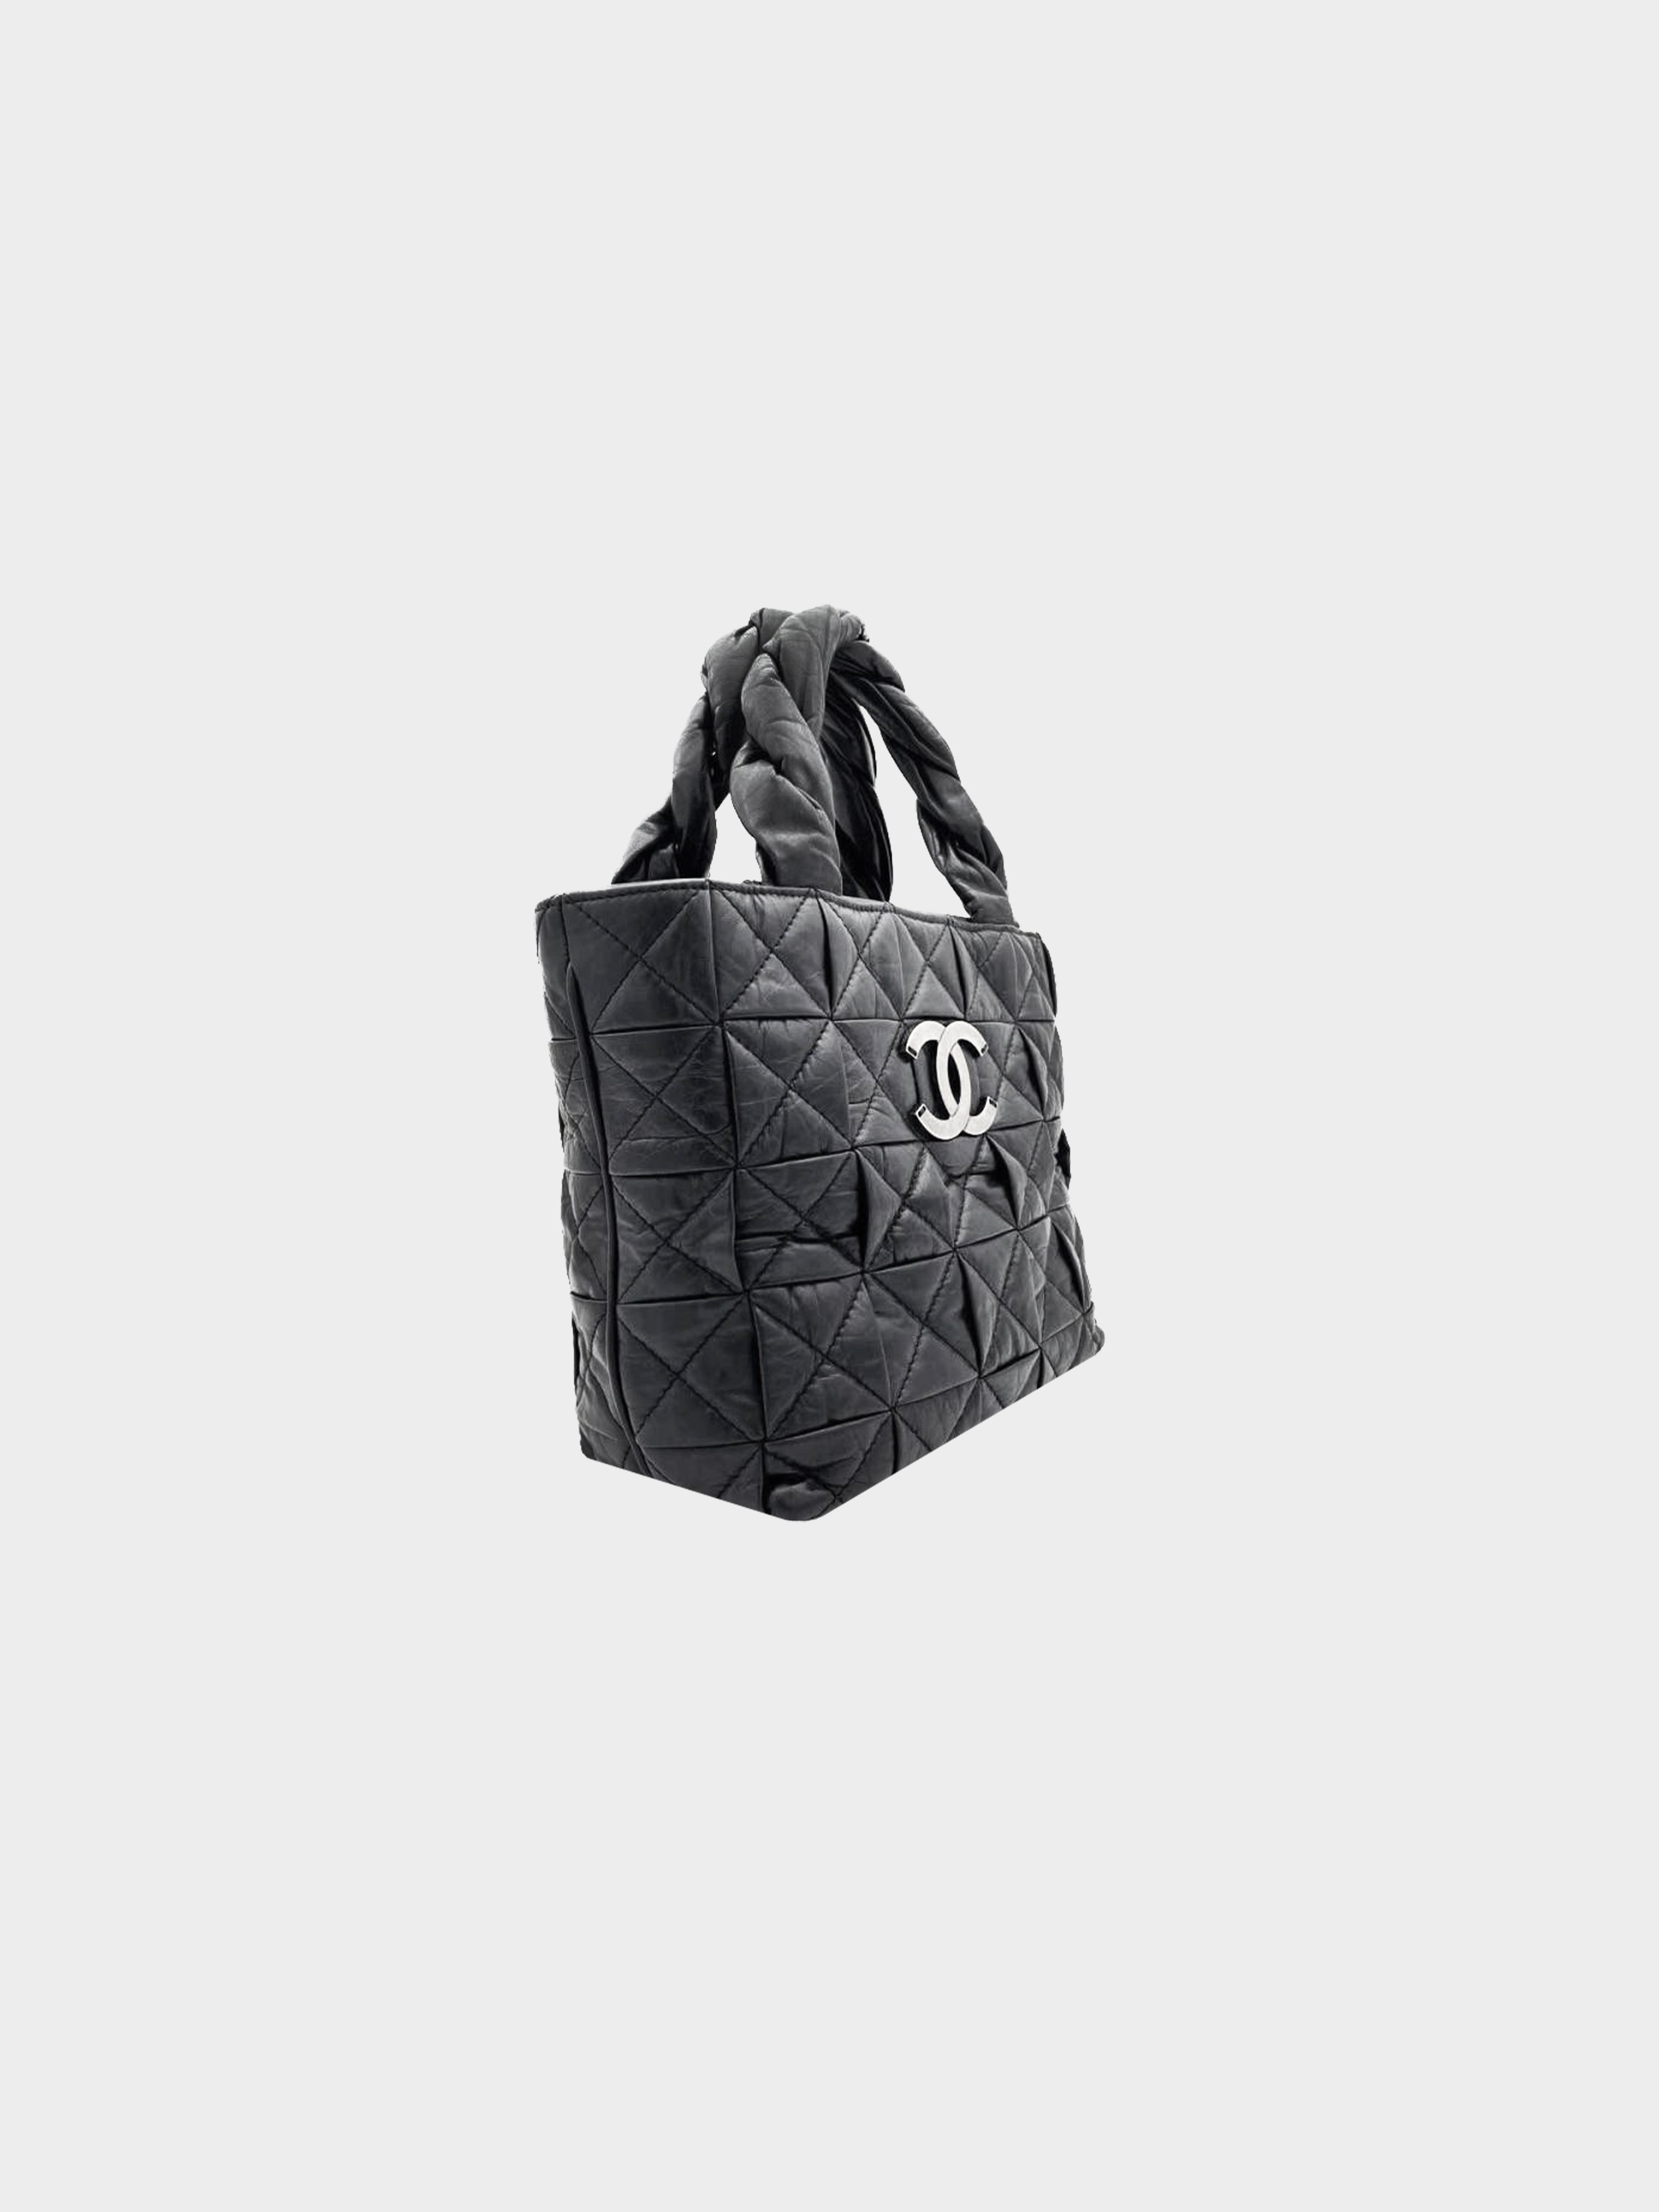 Chanel Quilted Black Leather Latch Front Tote Bag – Ladybag